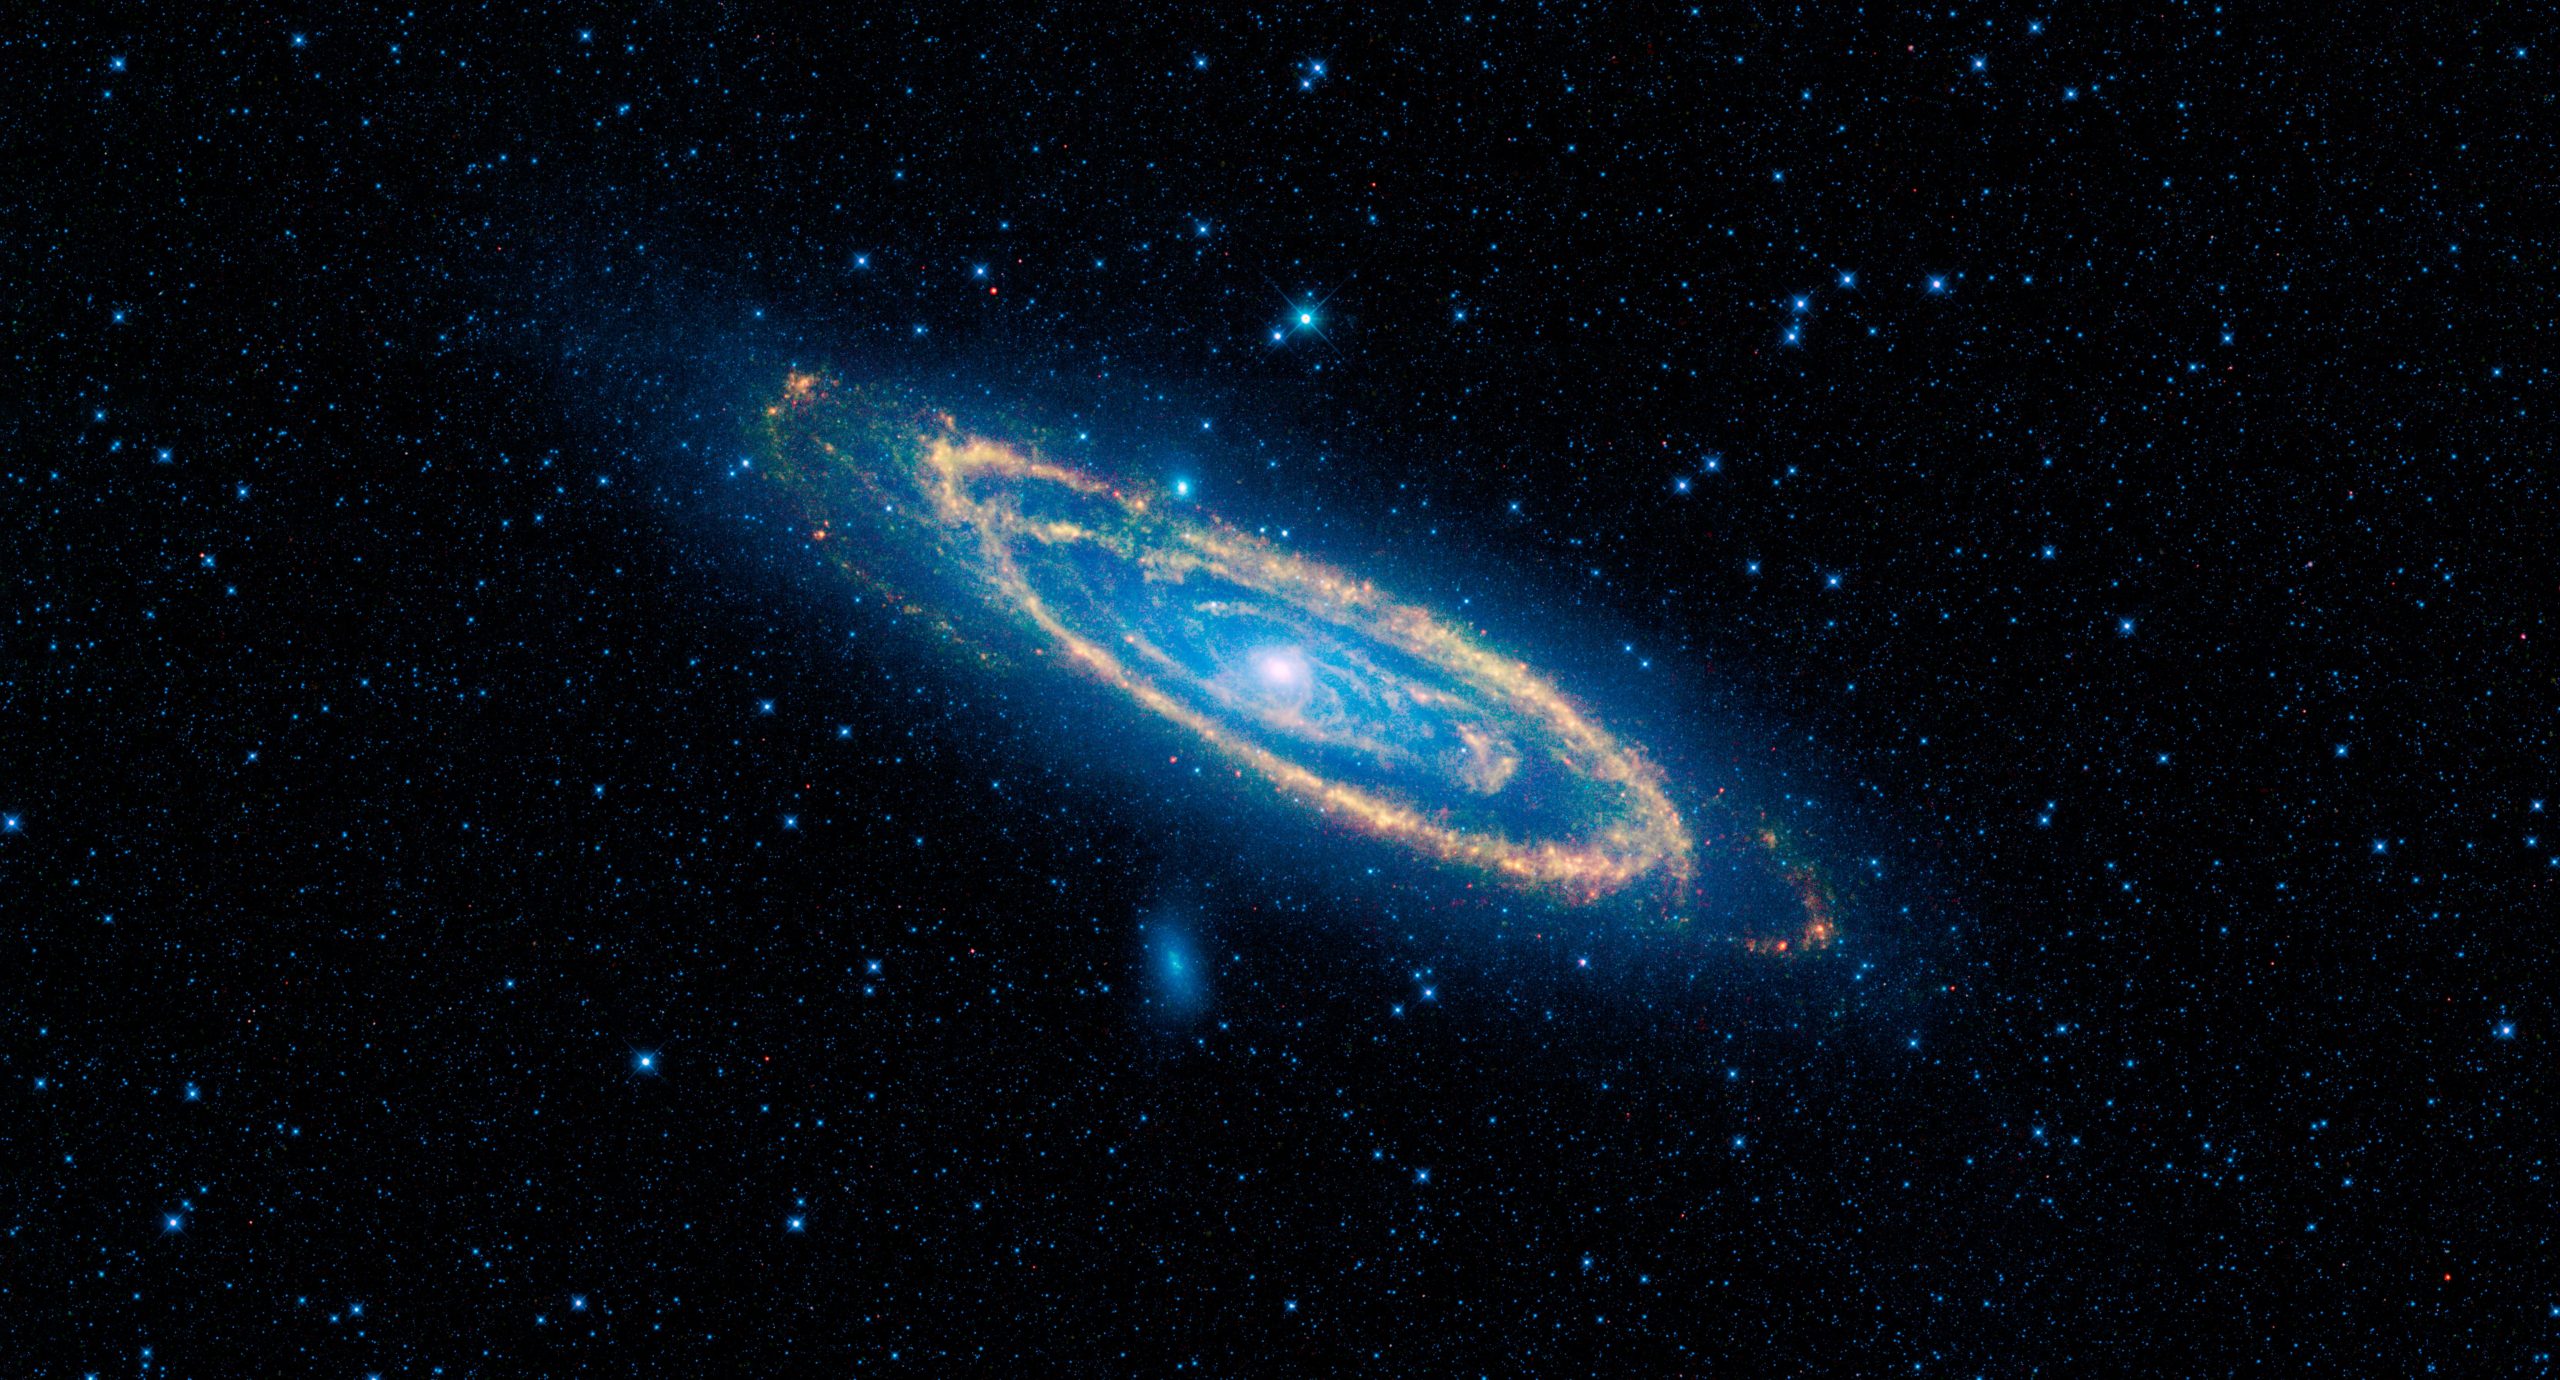 Scientists found a new intermediate black hole candidate in the Andromeda Galaxy. Credit: NASA/JPL-Caltech/UCLA